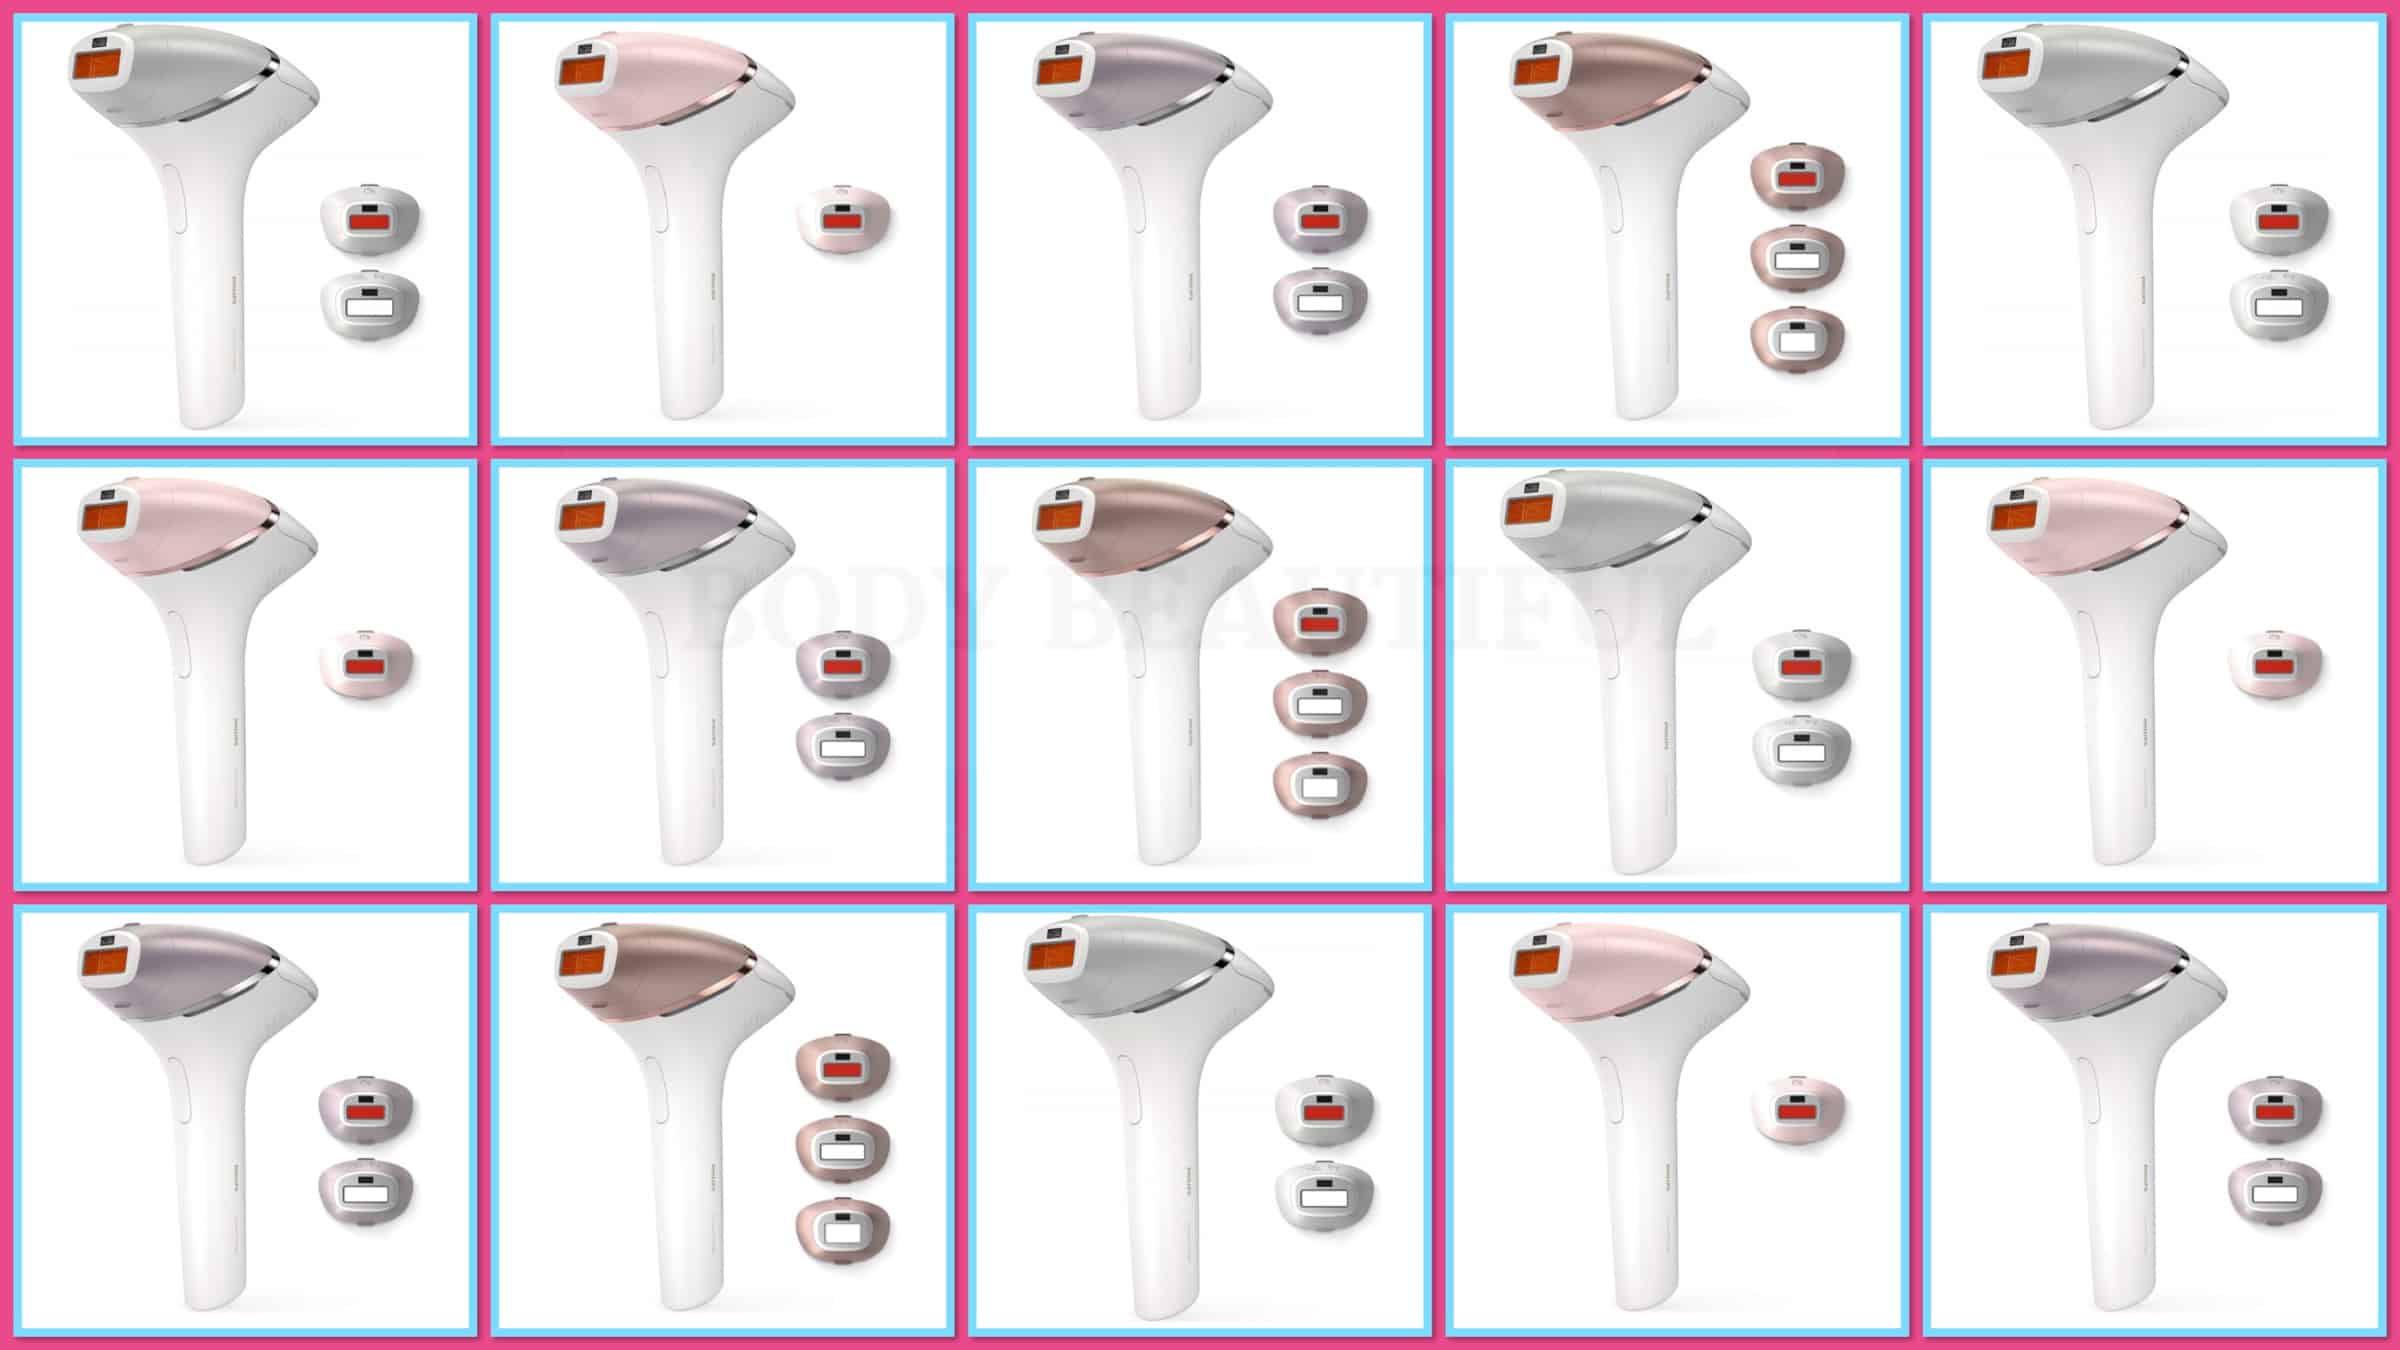 In particular Read satisfaction Philips Lumea Prestige models differences comparison